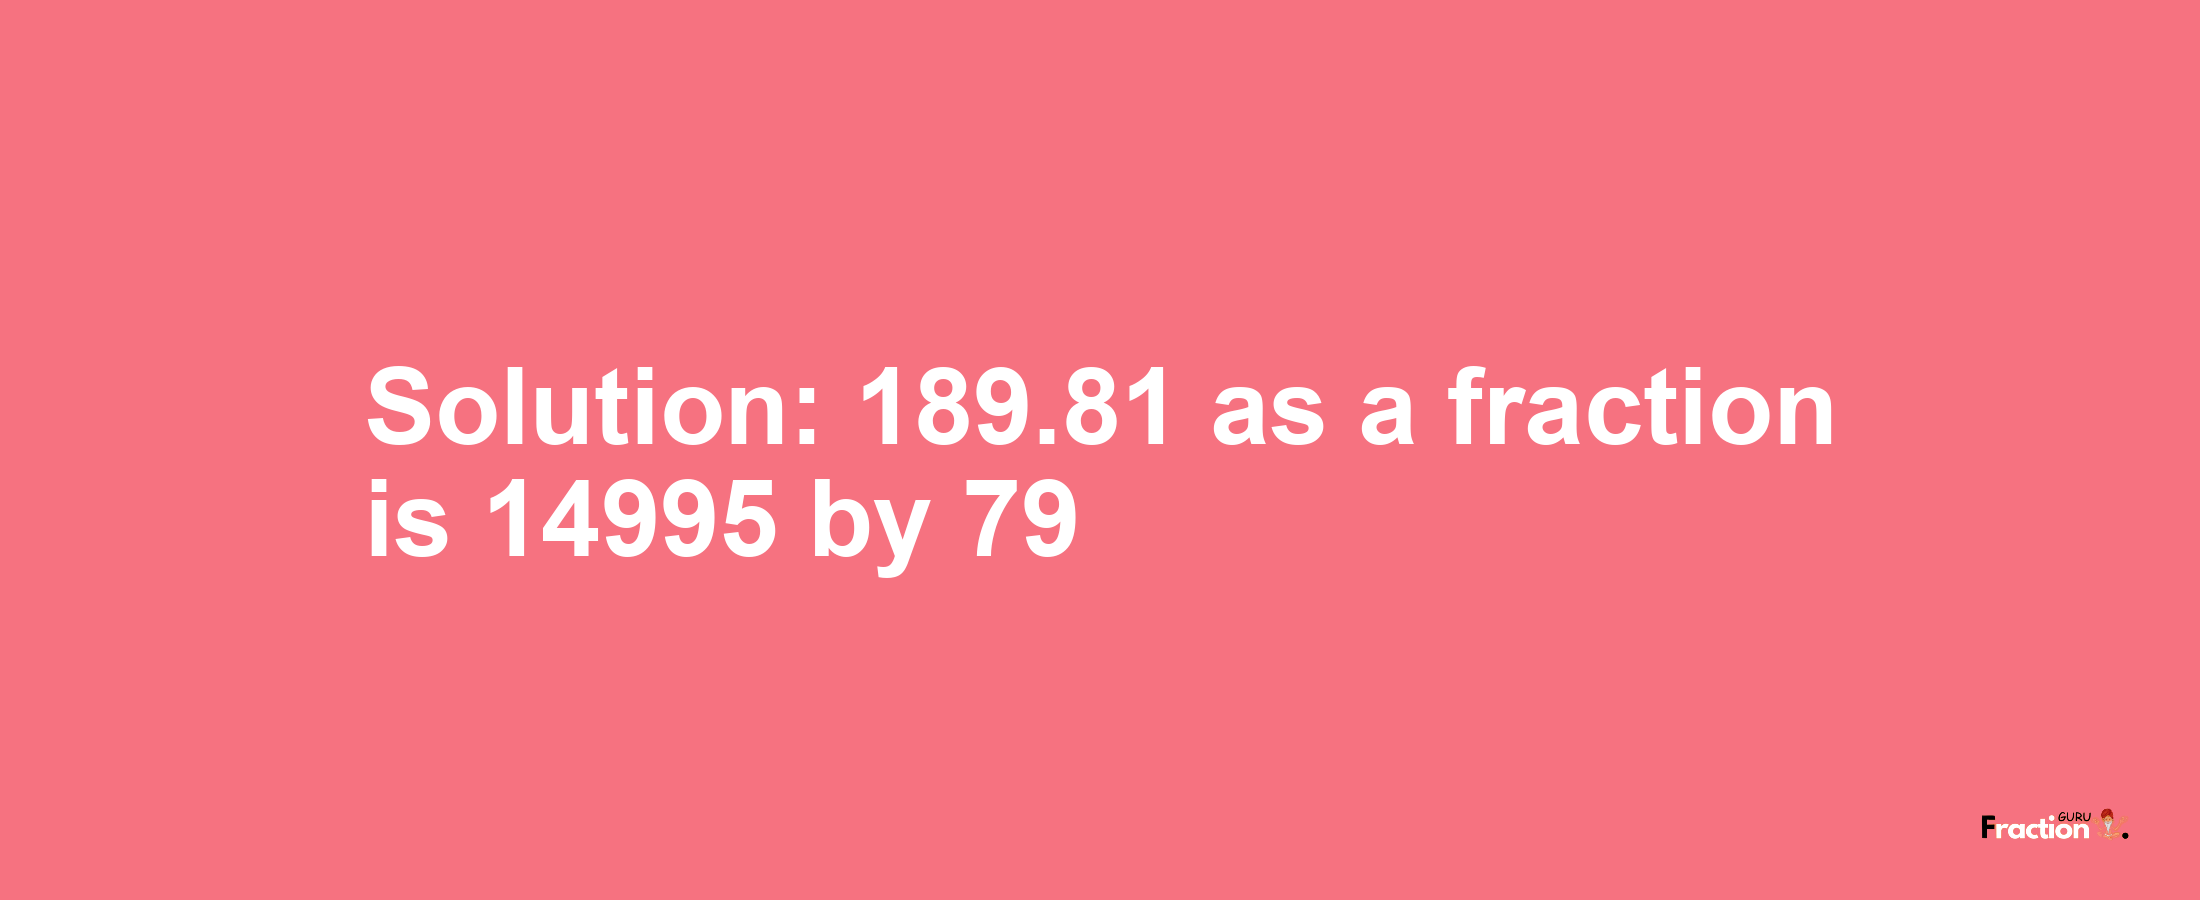 Solution:189.81 as a fraction is 14995/79